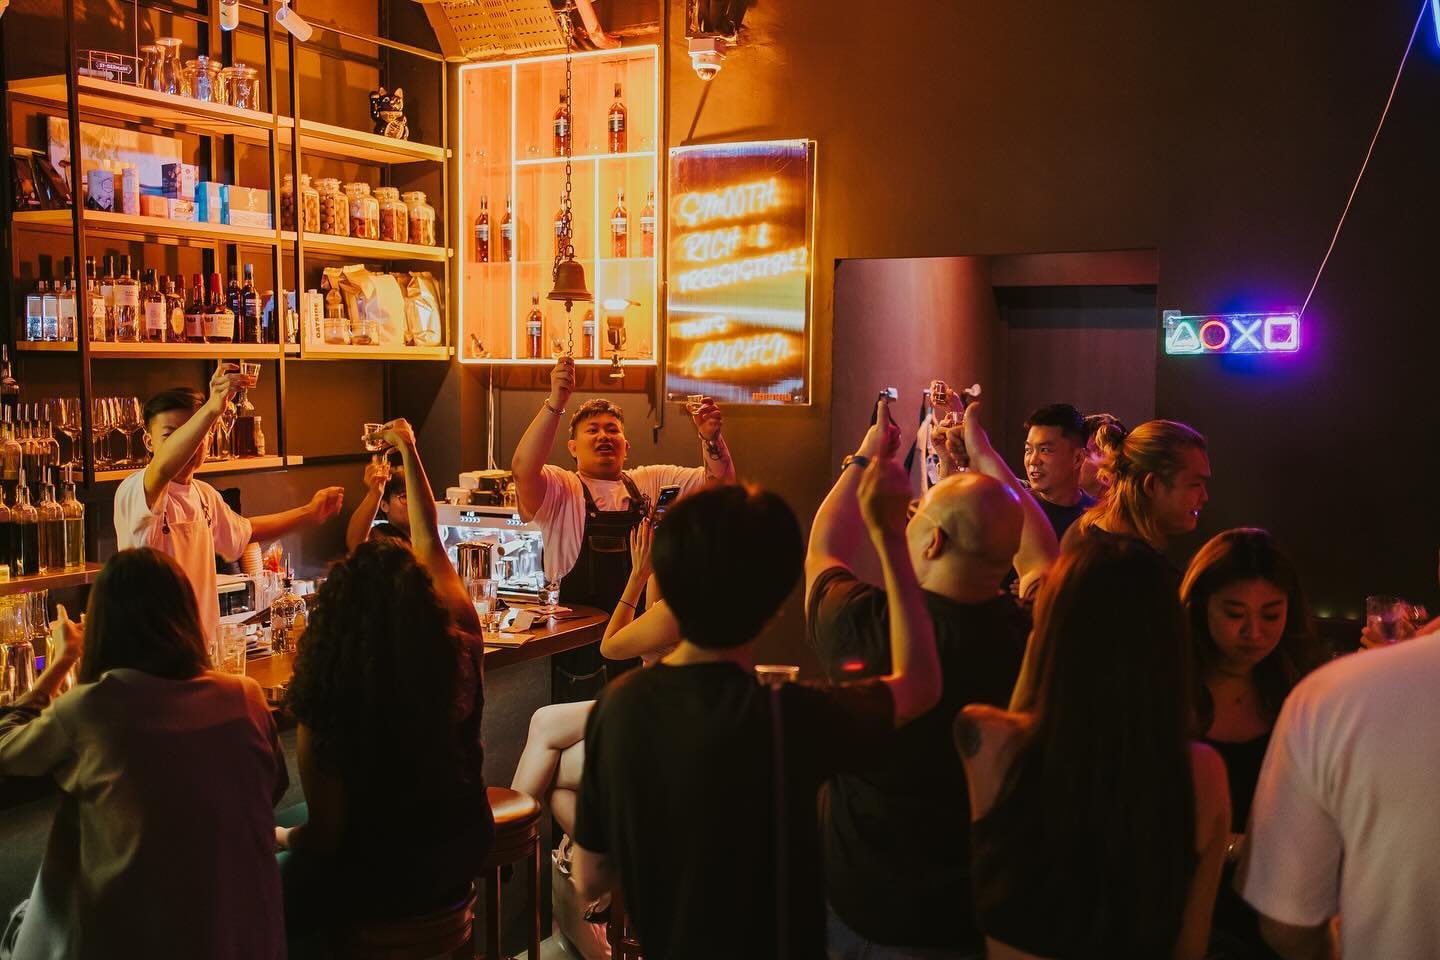 come cheers to everything and anything with us at White Shades! 
Our new level 1 concept - Highball starting at 4pm daily @ only $10. 
-